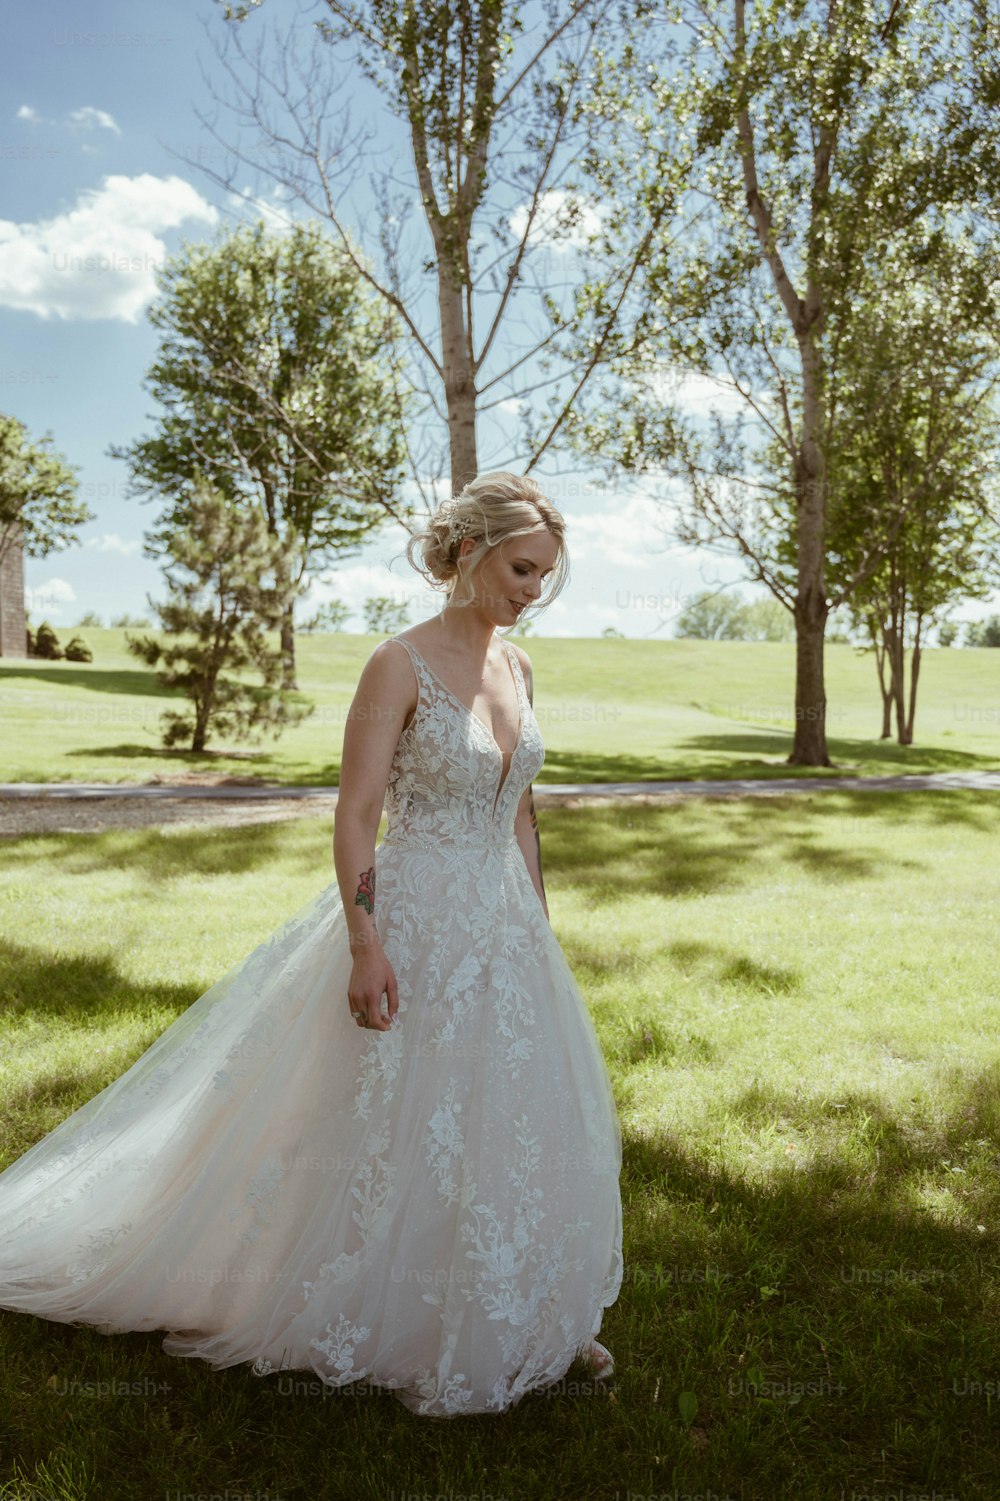 a woman in a wedding dress standing in the grass